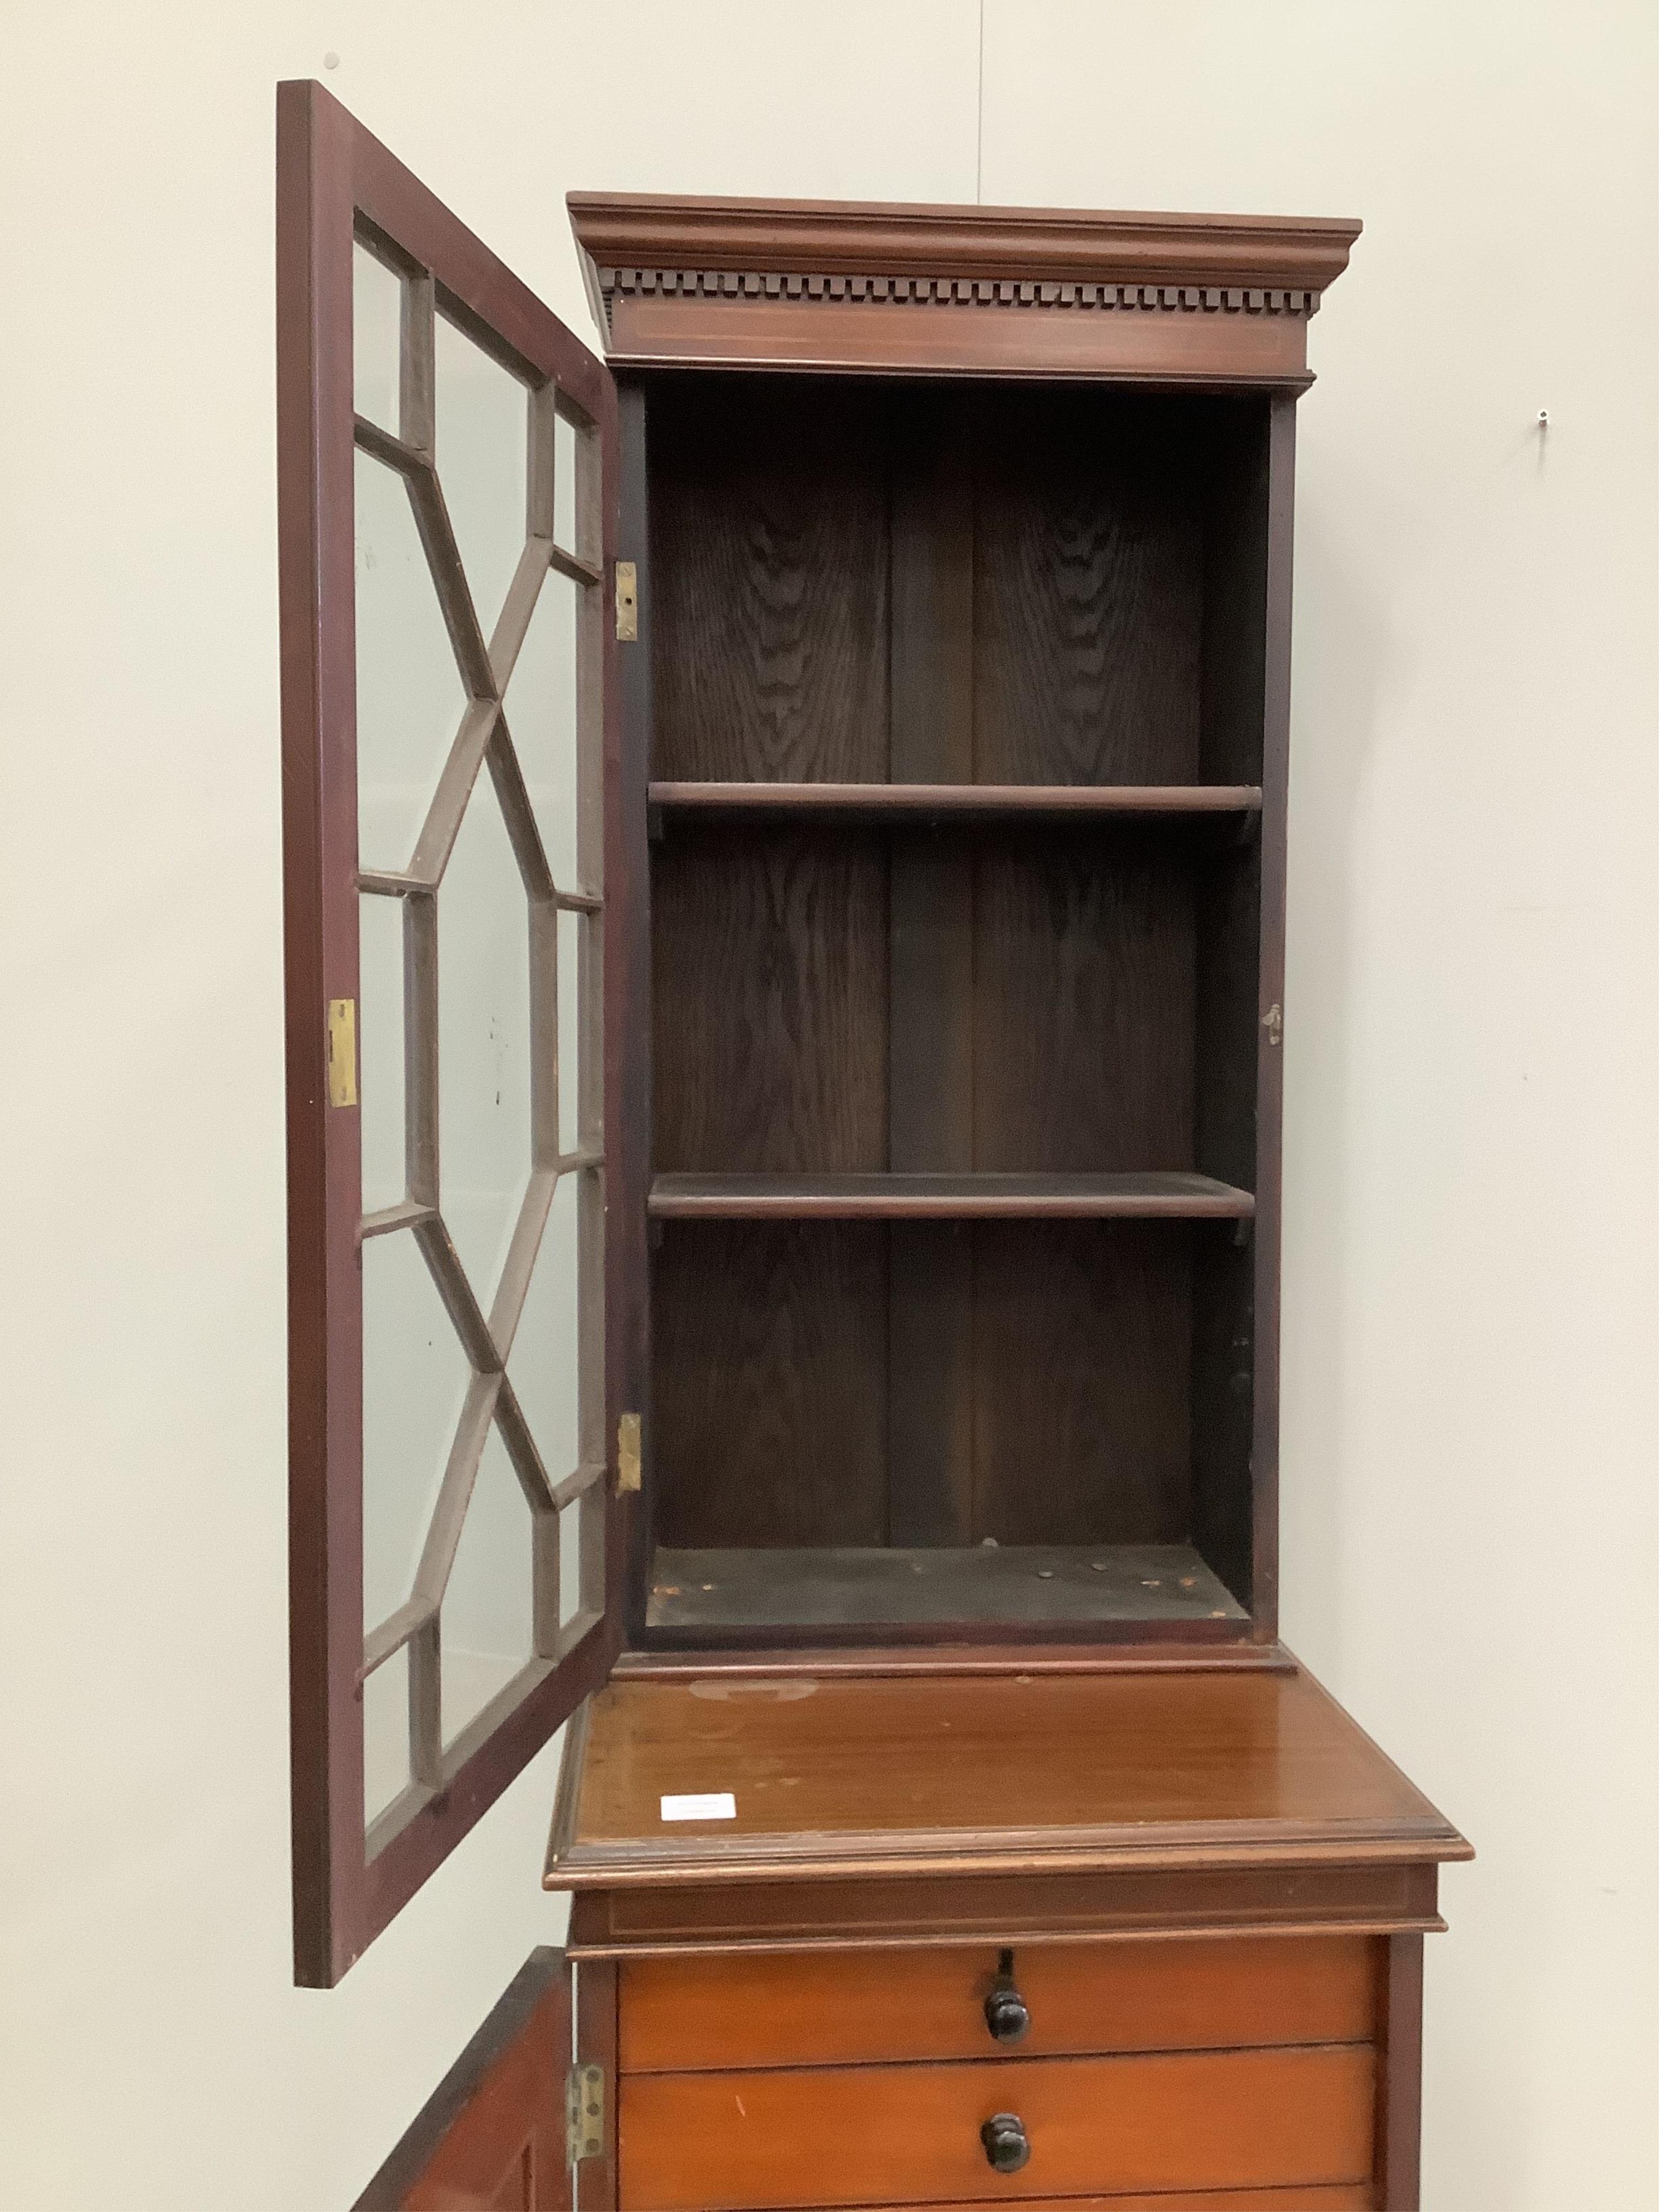 An Edwardian inlaid mahogany bookcase / collector's cabinet of narrow proportions, width 51cm, depth 46cm, height 187cm. Condition - fair